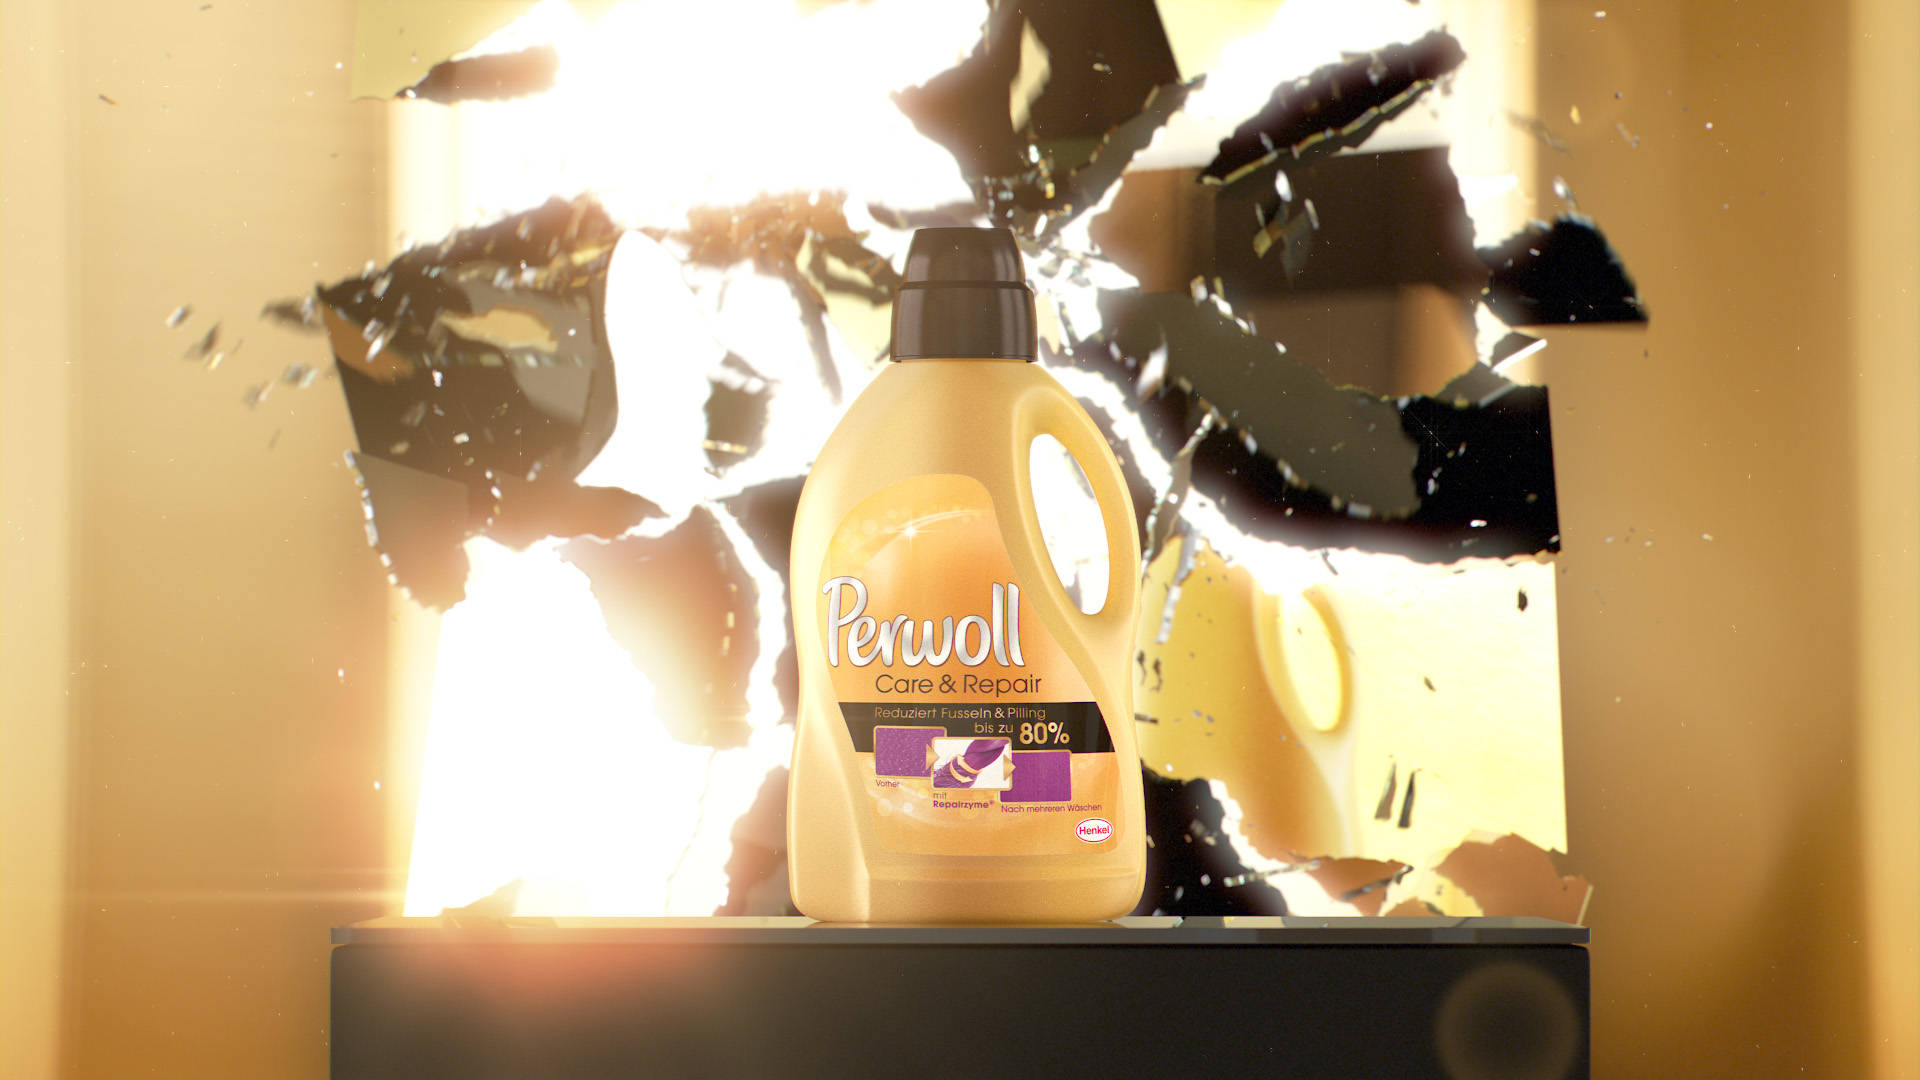 VFX course poster for Advanced Rendering in Arnold showing a rendering of a yellow detergent bottle infront of a shattering mirror.